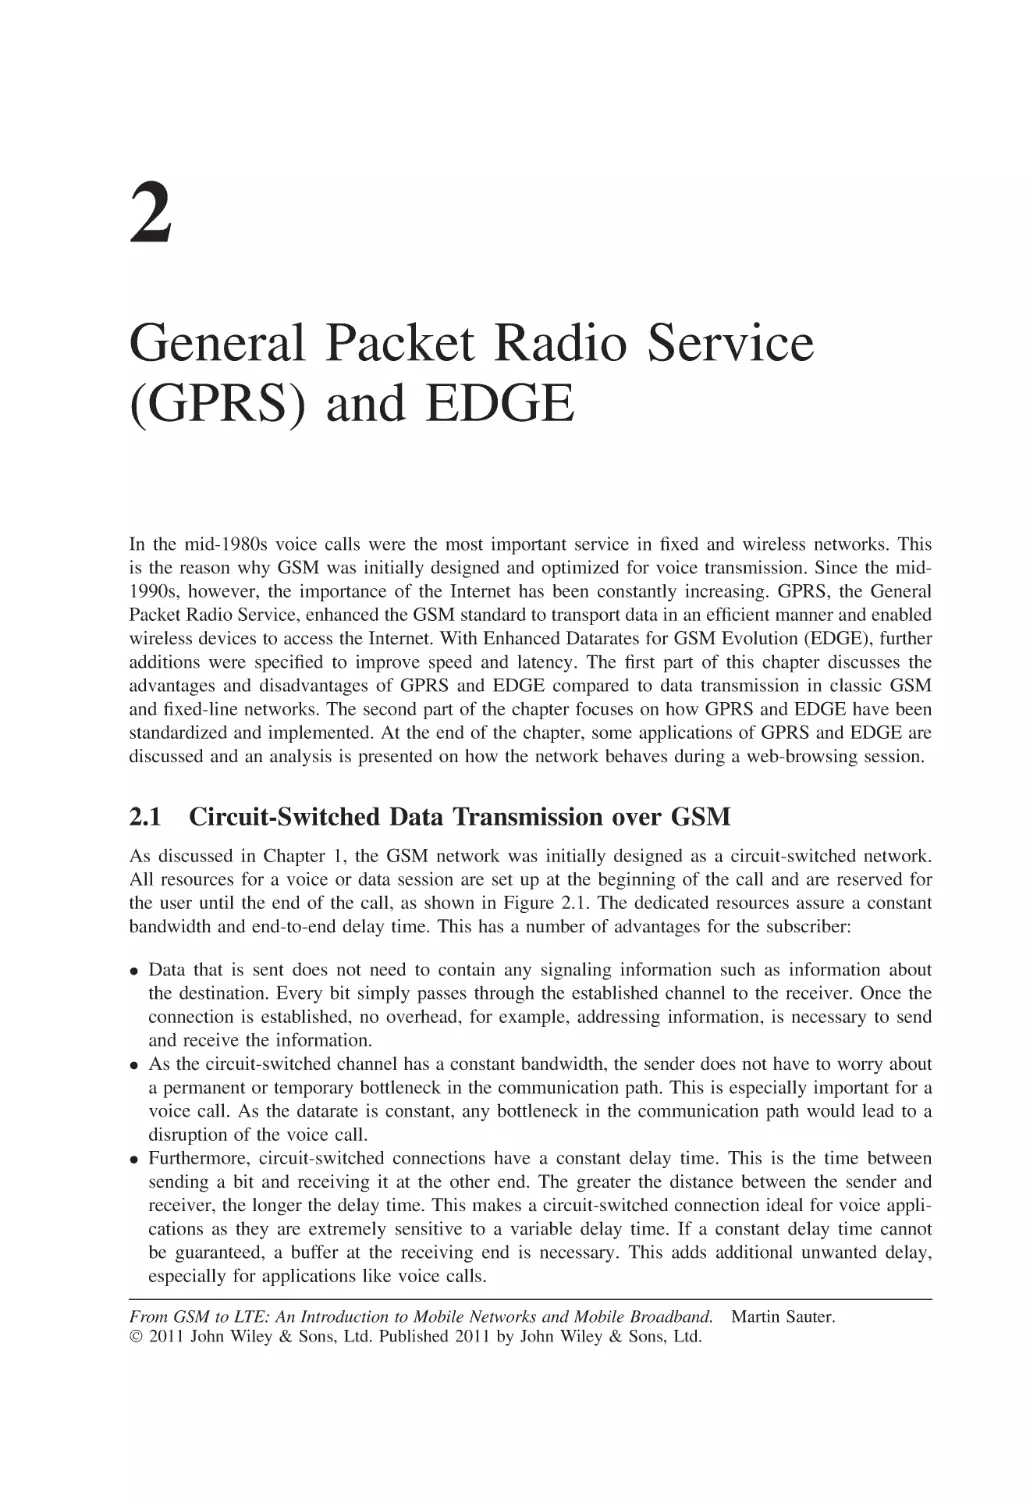 2 General Packet Radio Service (GPRS) and EDGE
2.1 Circuit-Switched Data Transmission over GSM